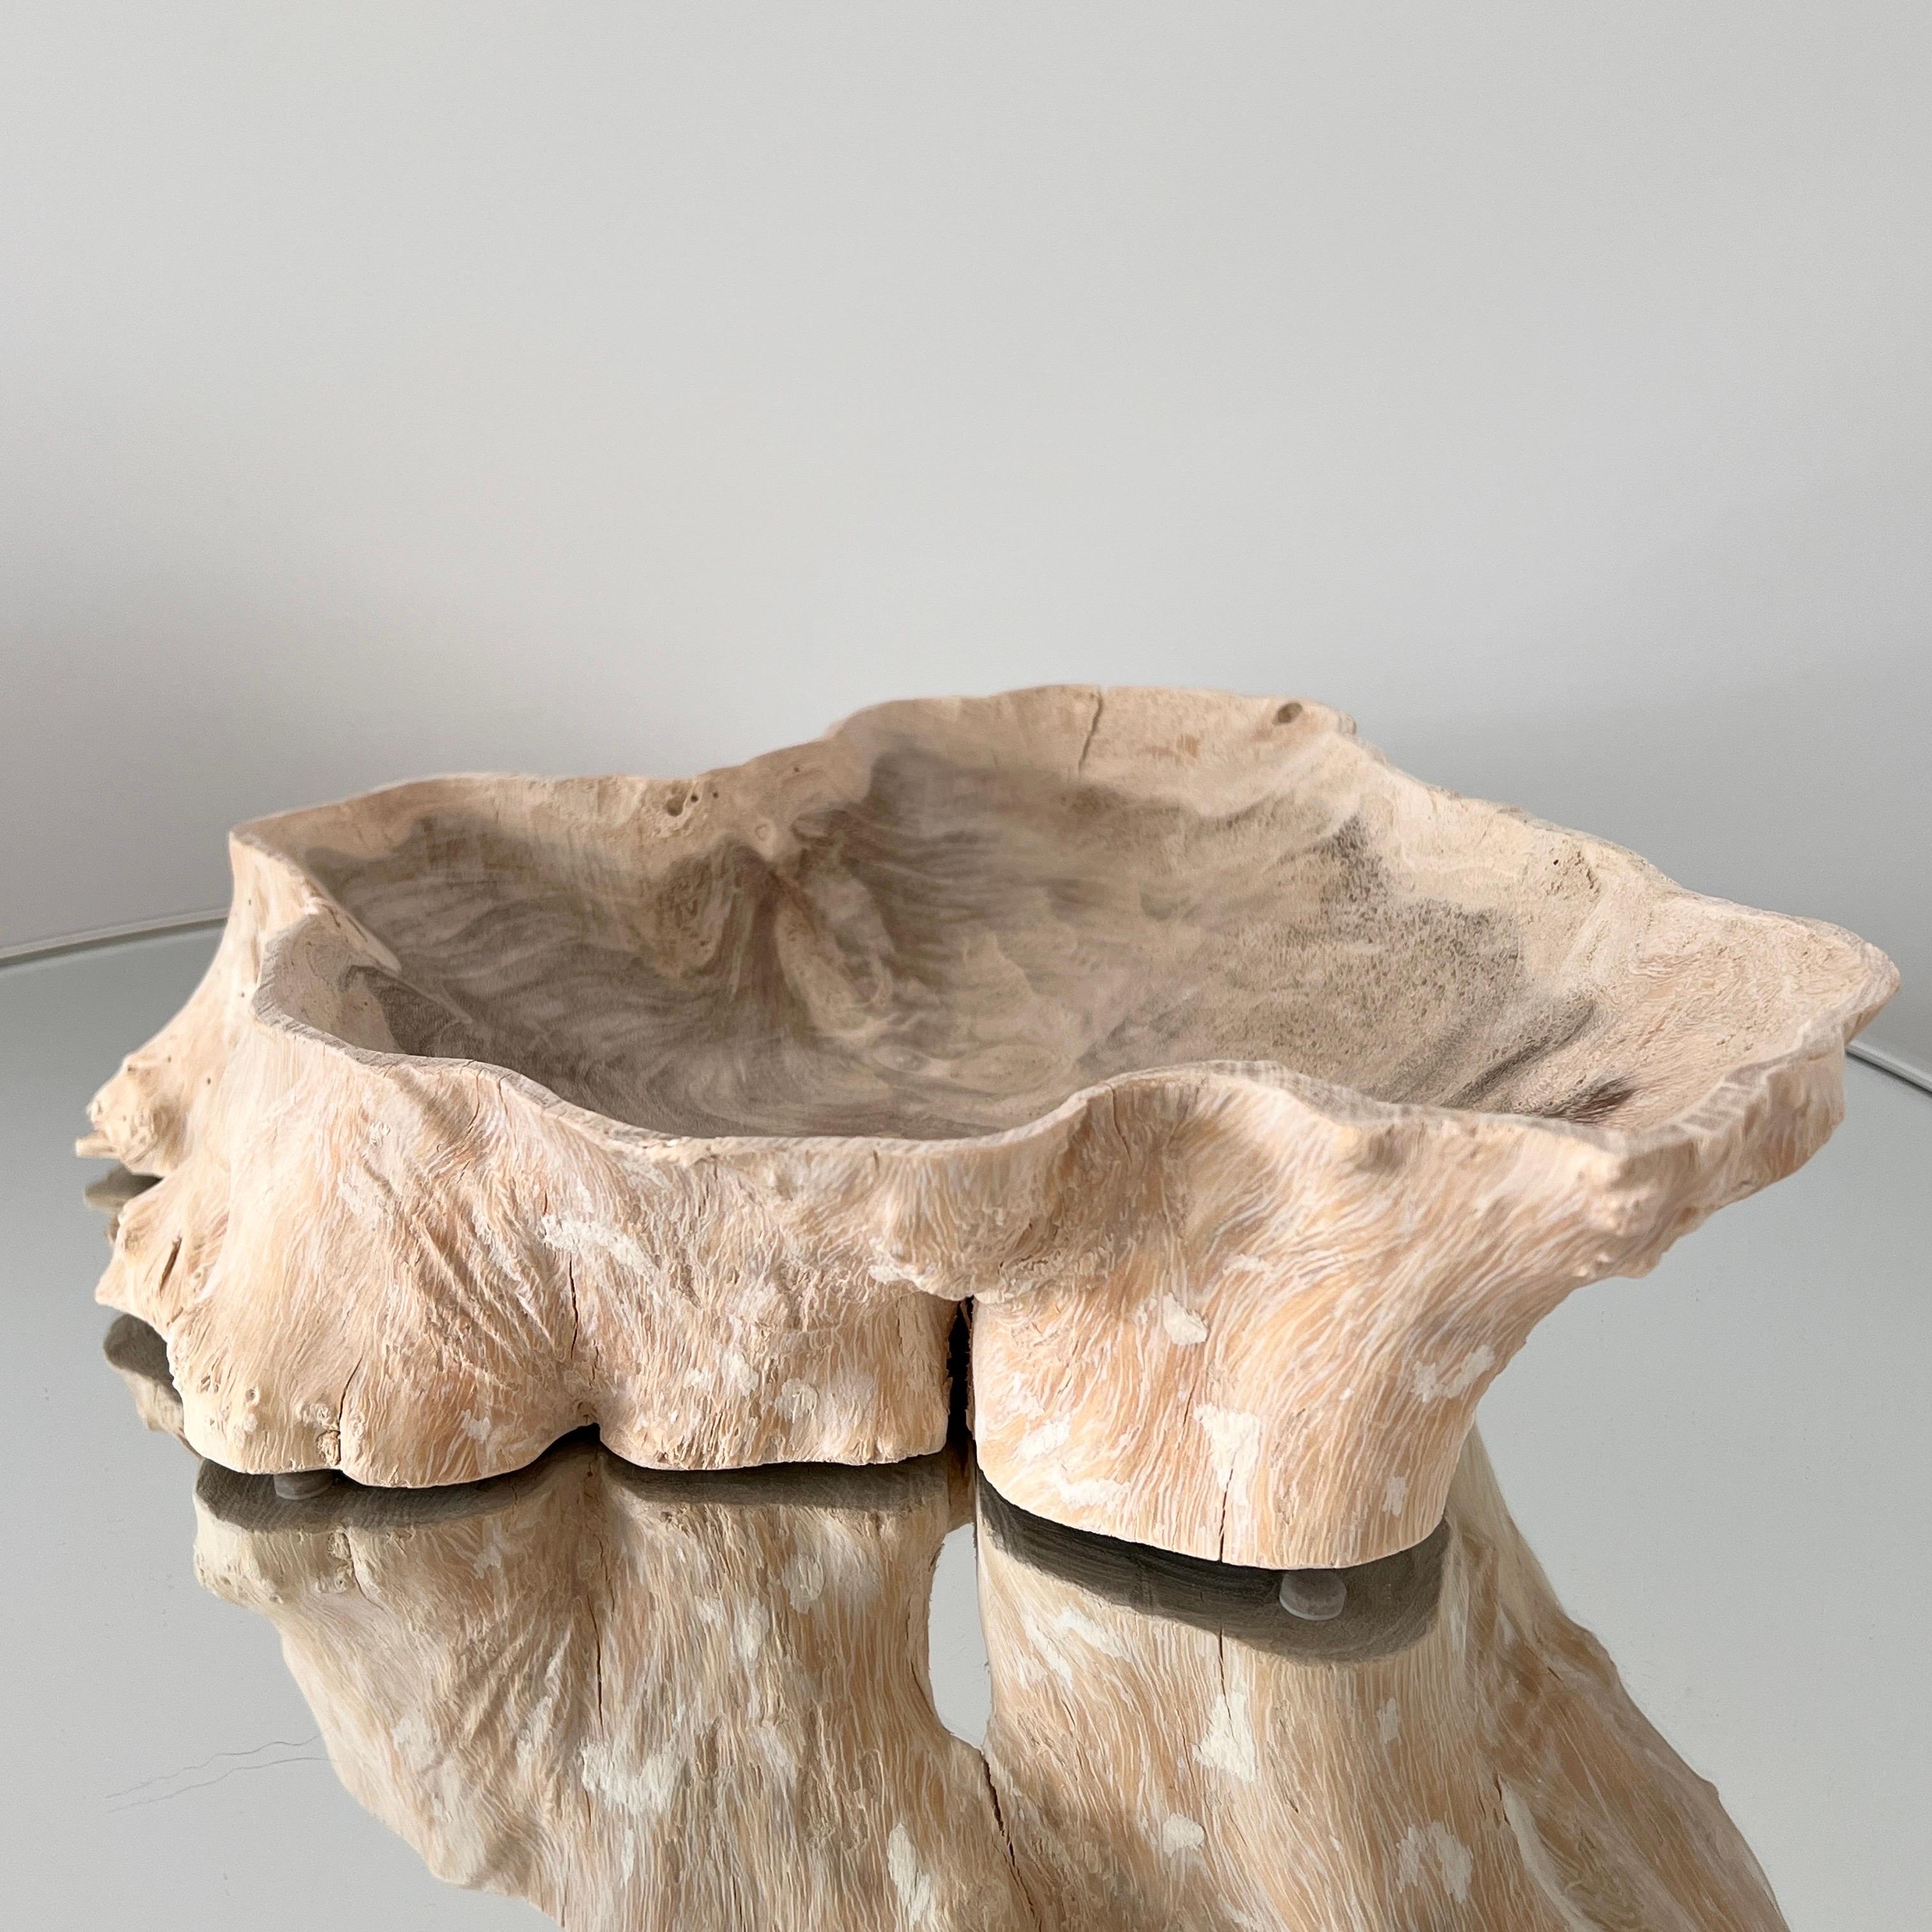 Balinese Organic Bleached Teak Root Wood Bowl with Live Edges, Indonesia